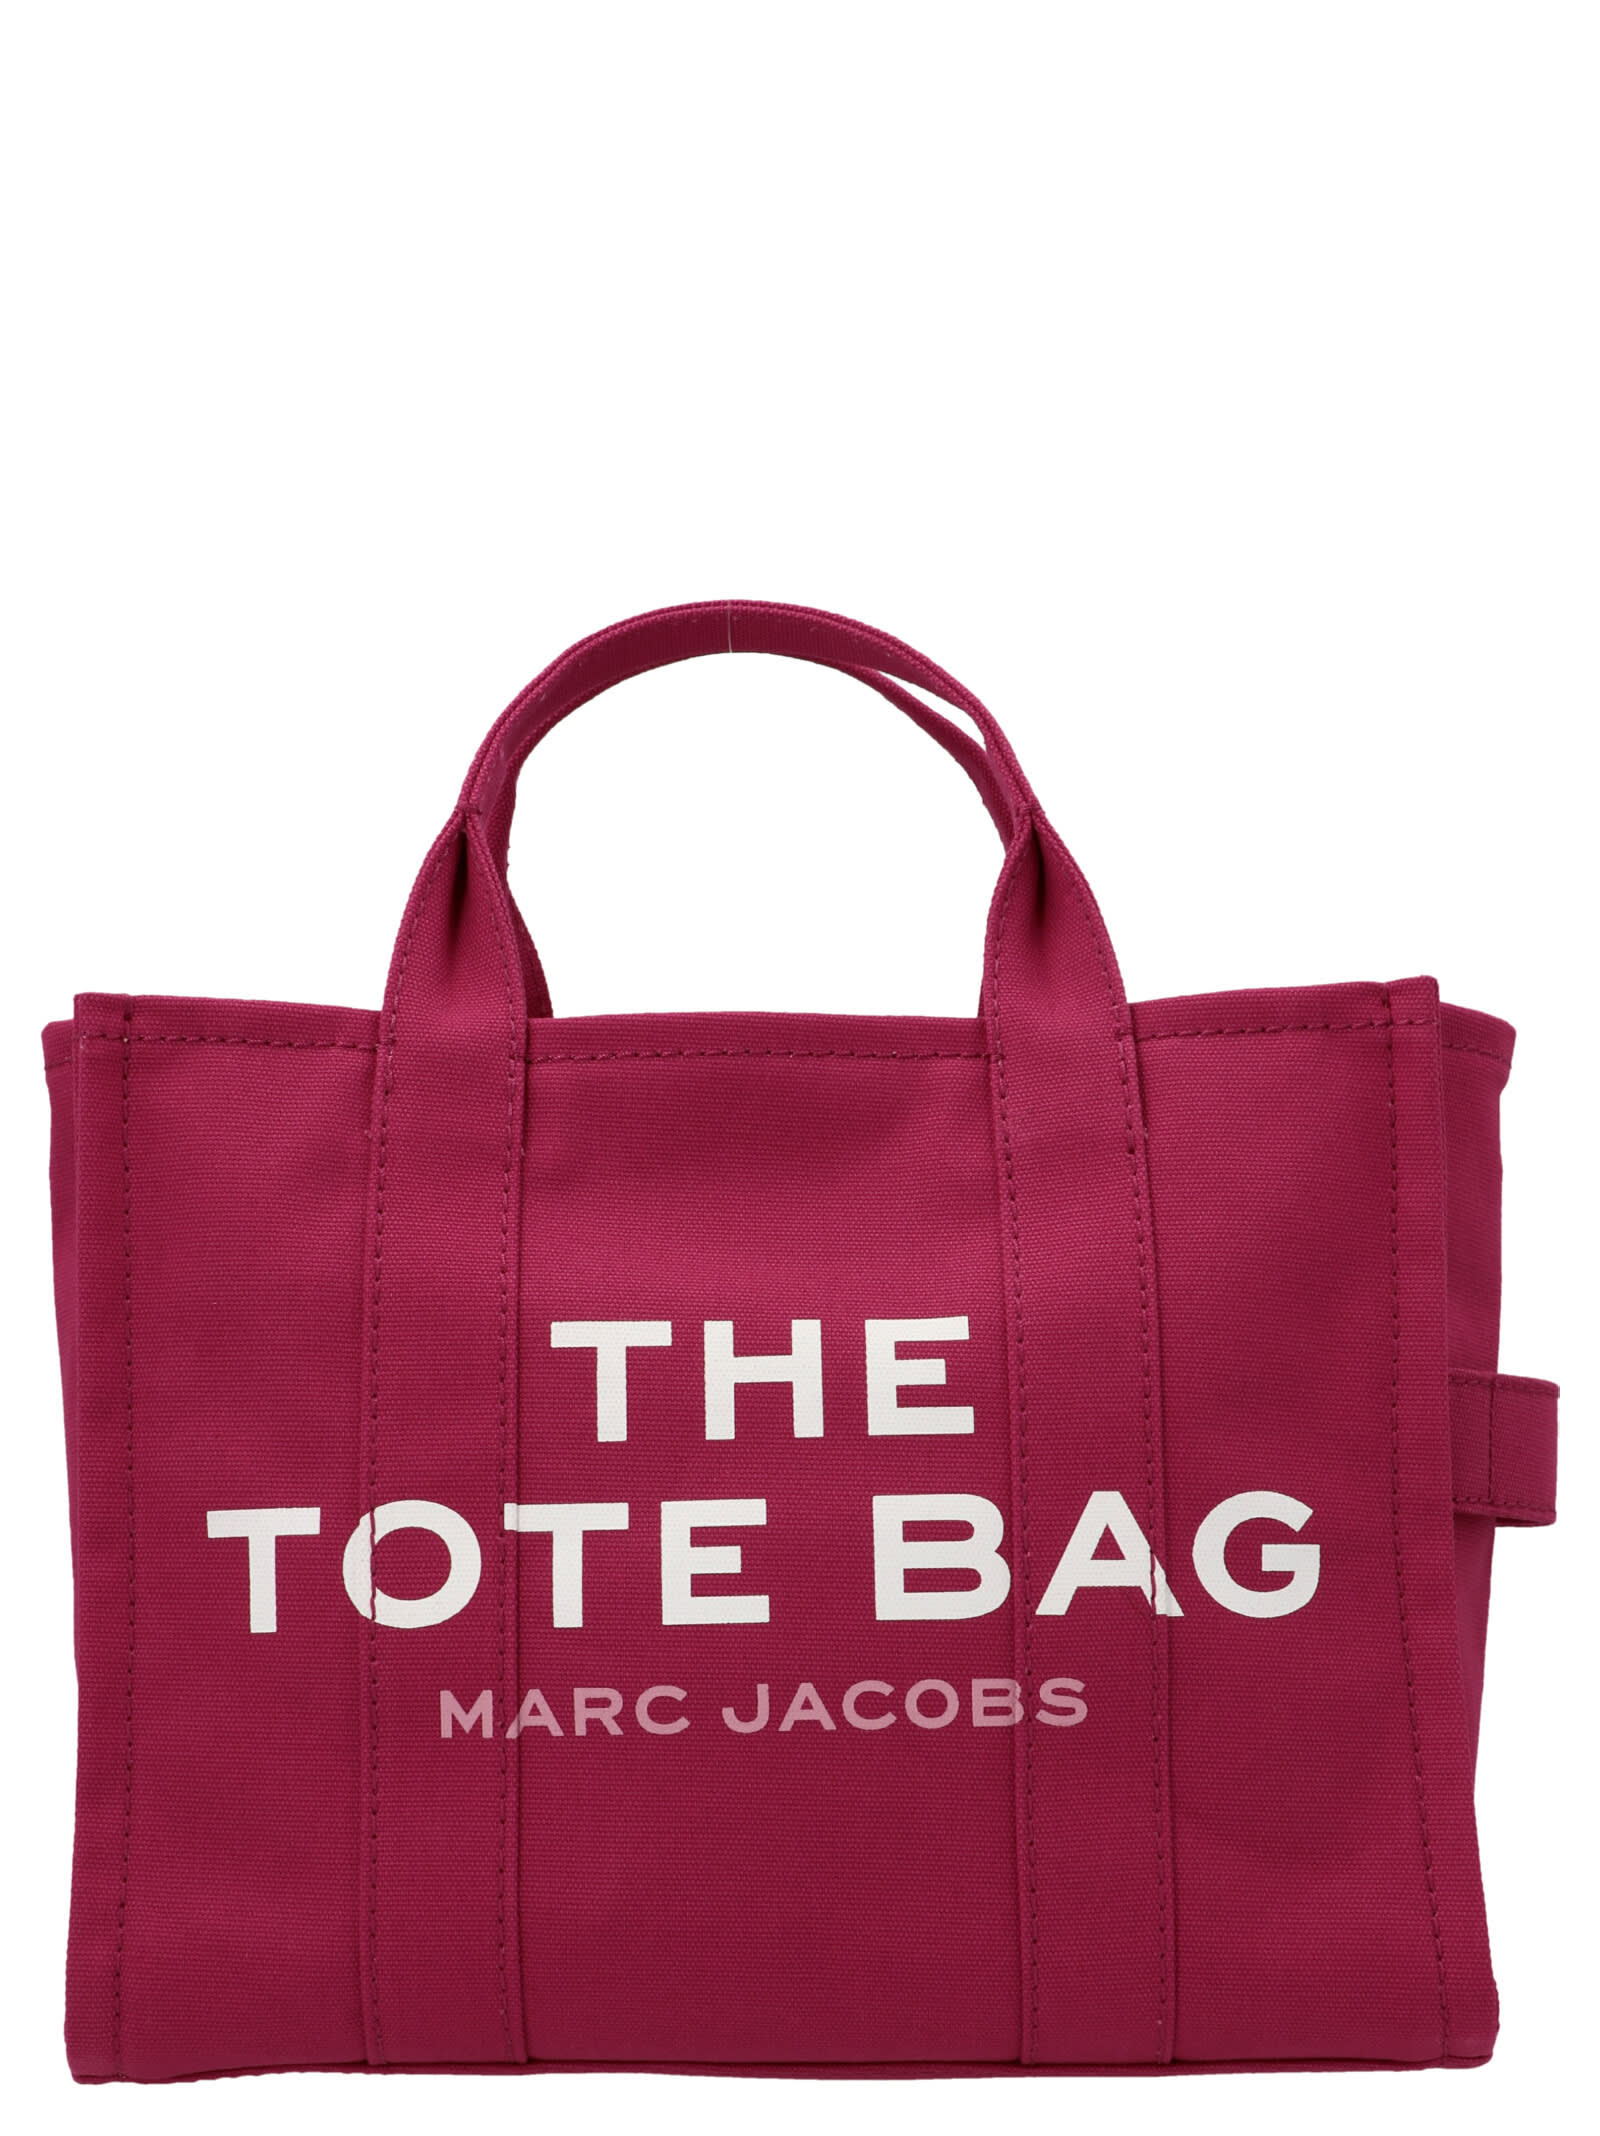 Marc Jacobs traveler Tote Small Bag